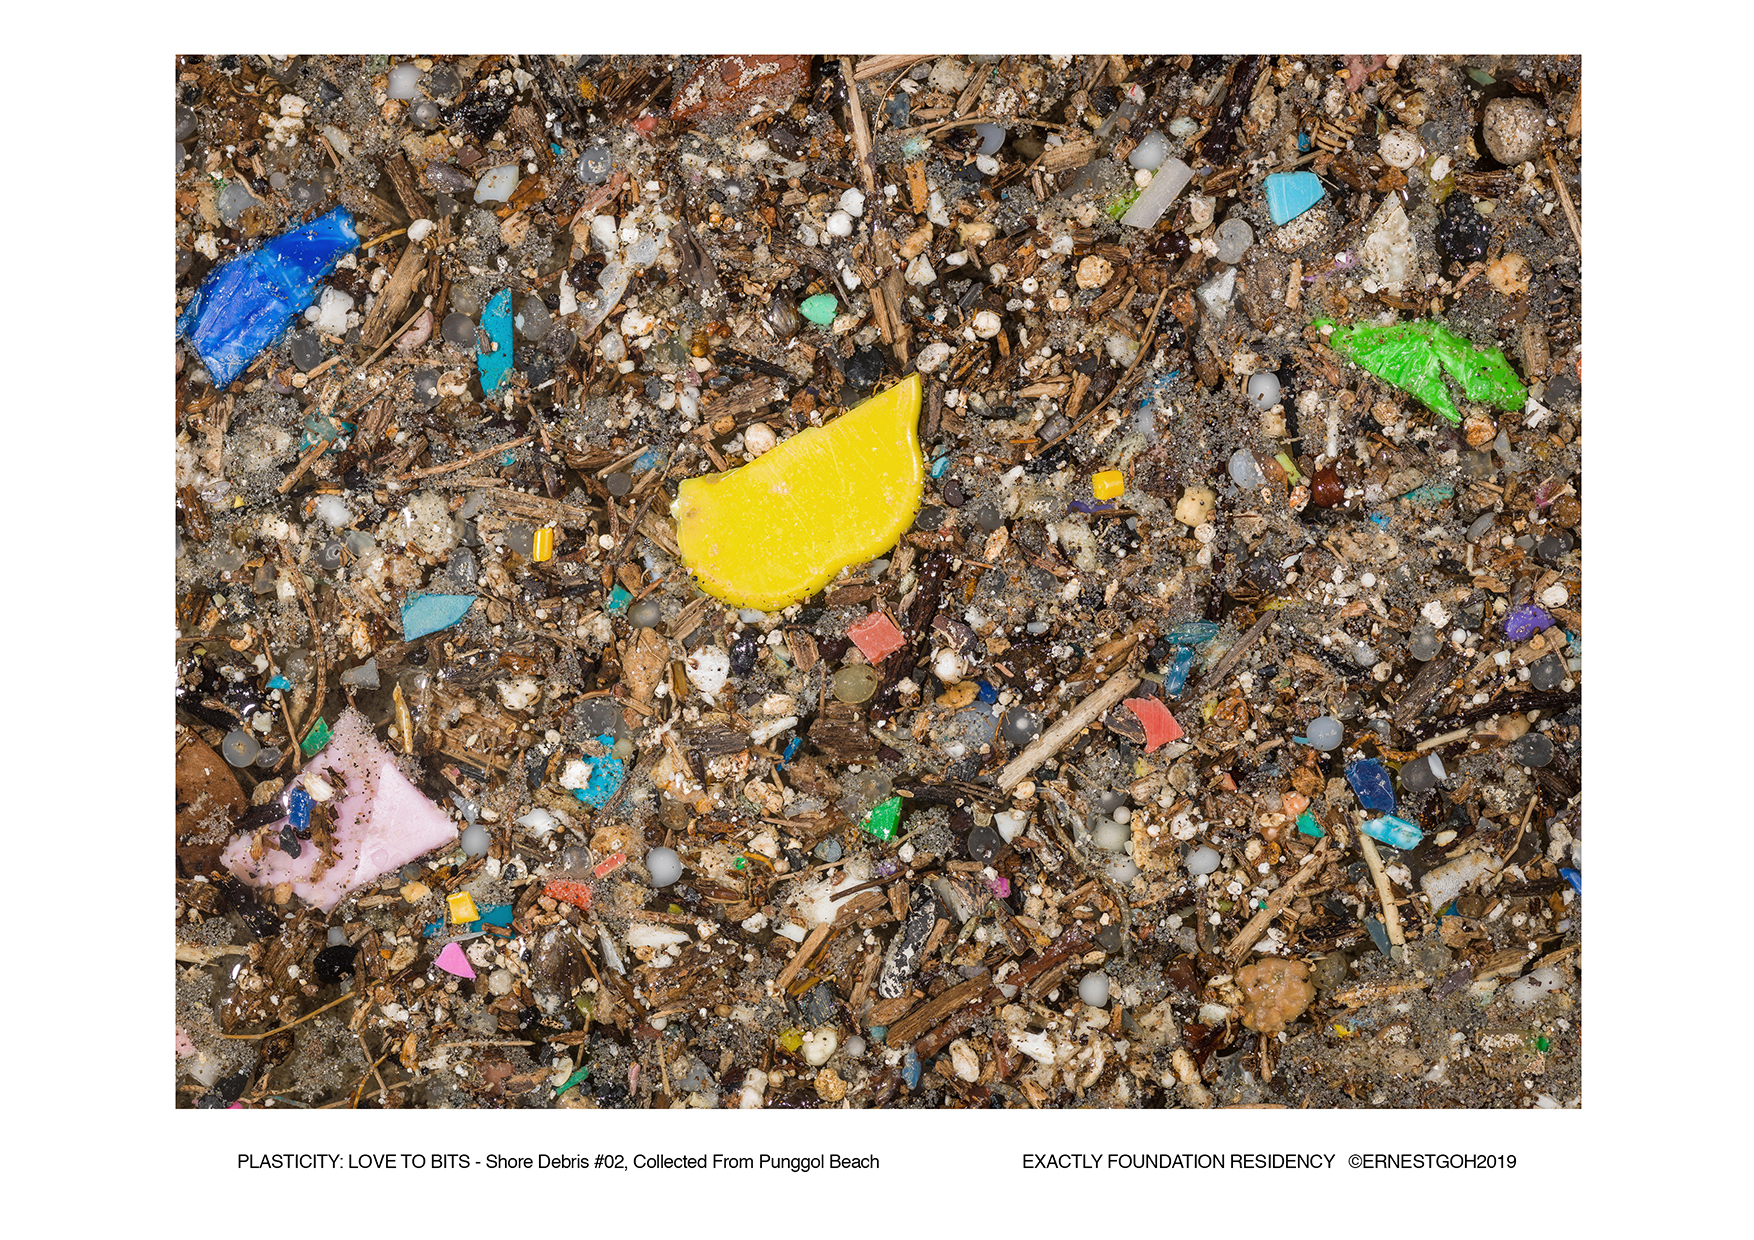 #15 Shore debris #2, Punggol Beach</br>© Ernest Goh, in residency with Exactly Foundation, November 2018